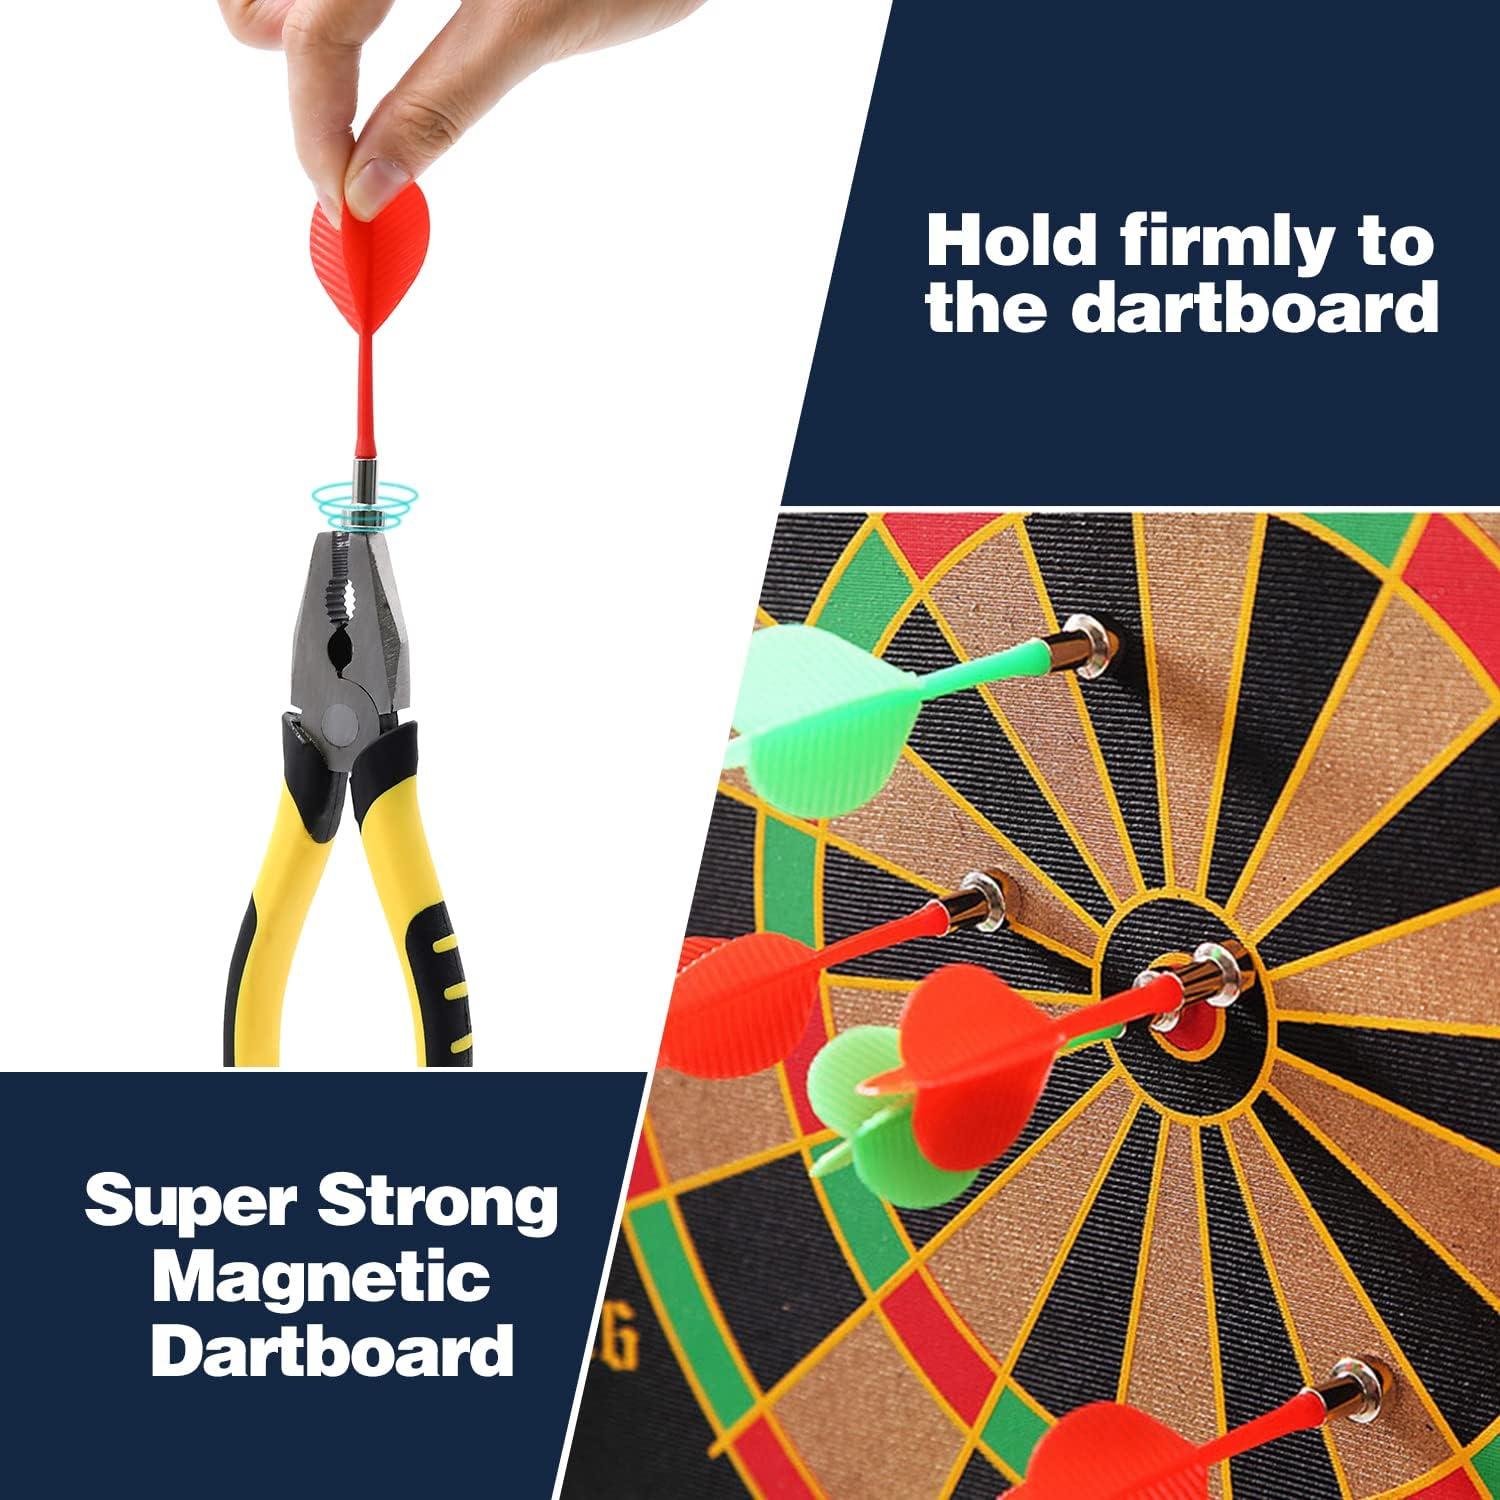 CX L SUM Magnetic Dart Board, Indoor Outdoor Dart Games for Kids with 12pcs Magnetic  Darts, Safety Toy Games, Rollup Double Sided Board Game Set for Gifts